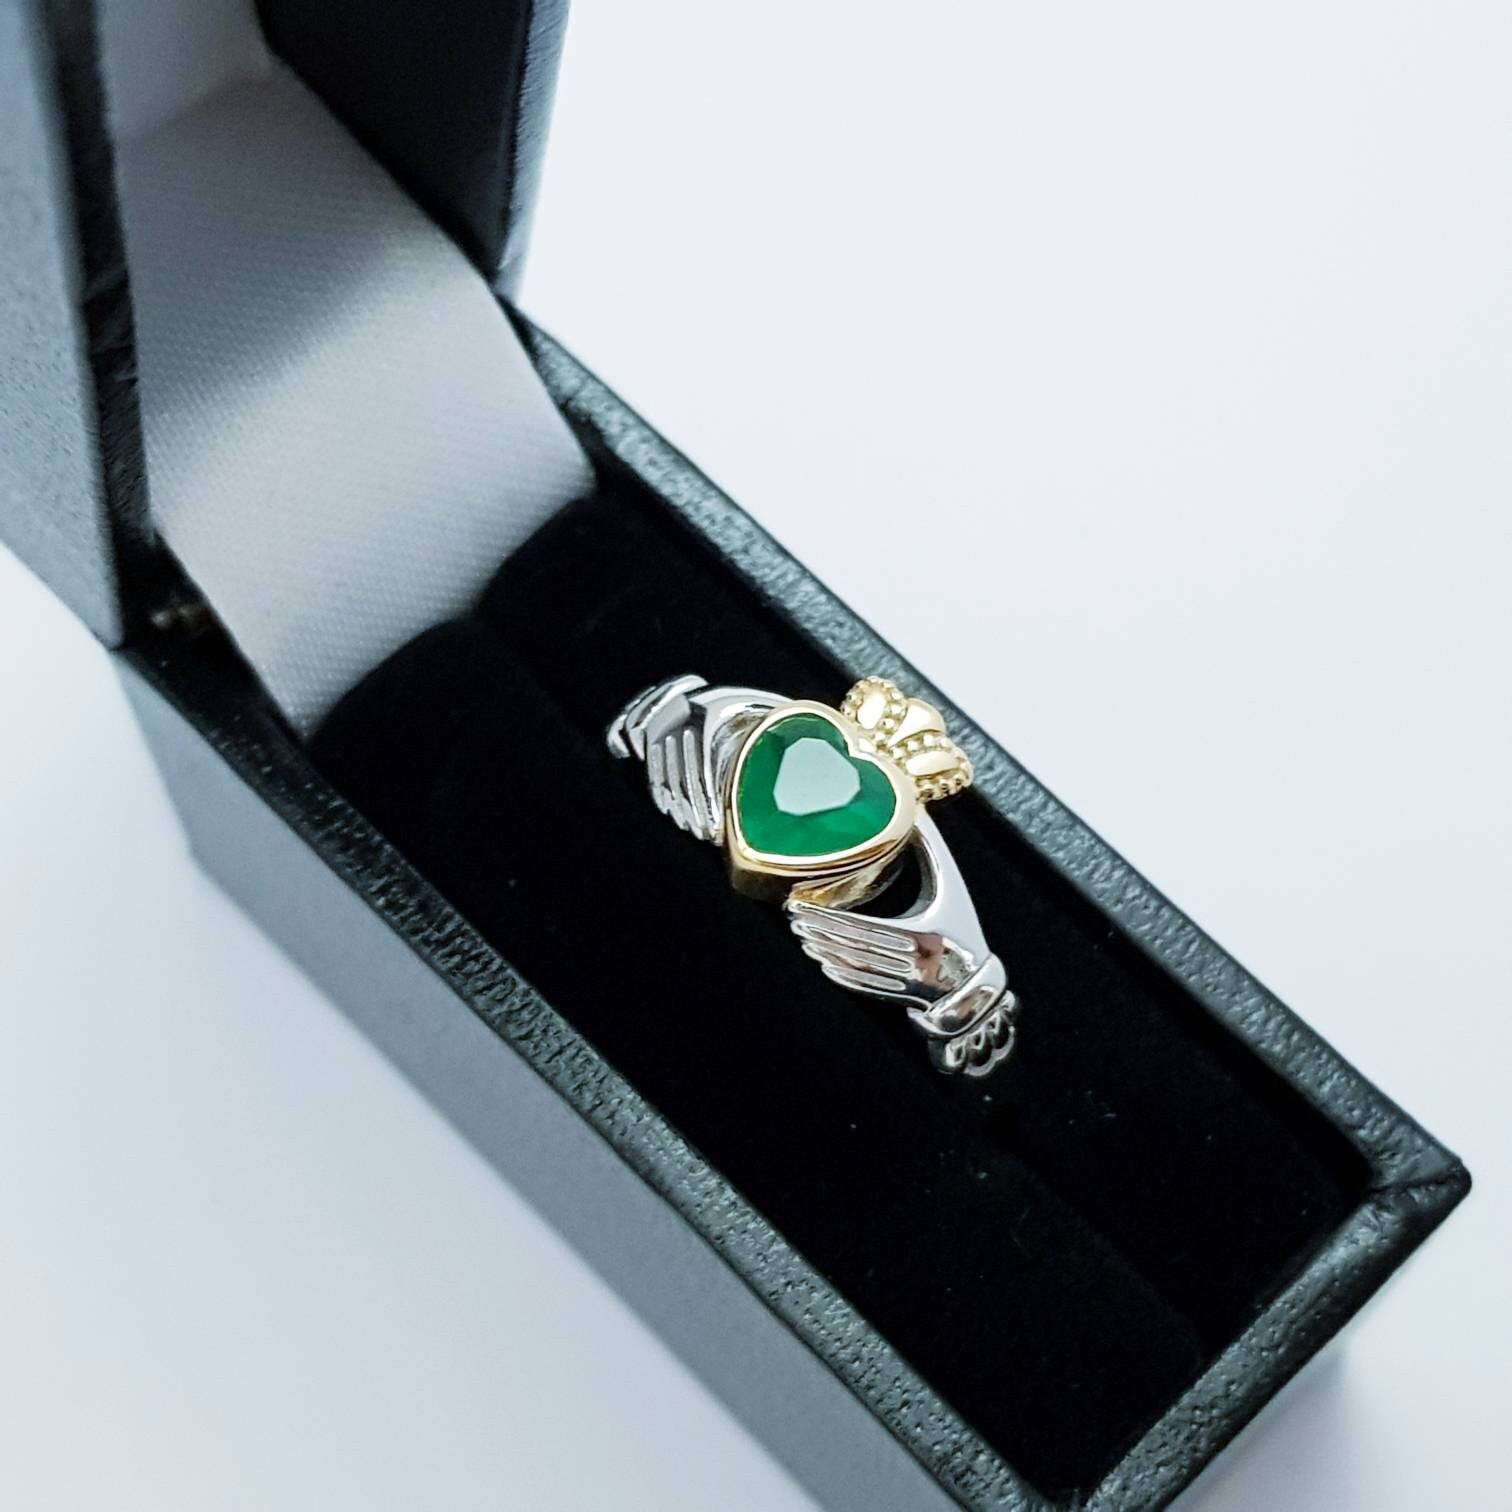 Sterling Silver yellow Gold plated Claddagh ring set with emerald green stone, irish claddagh rings